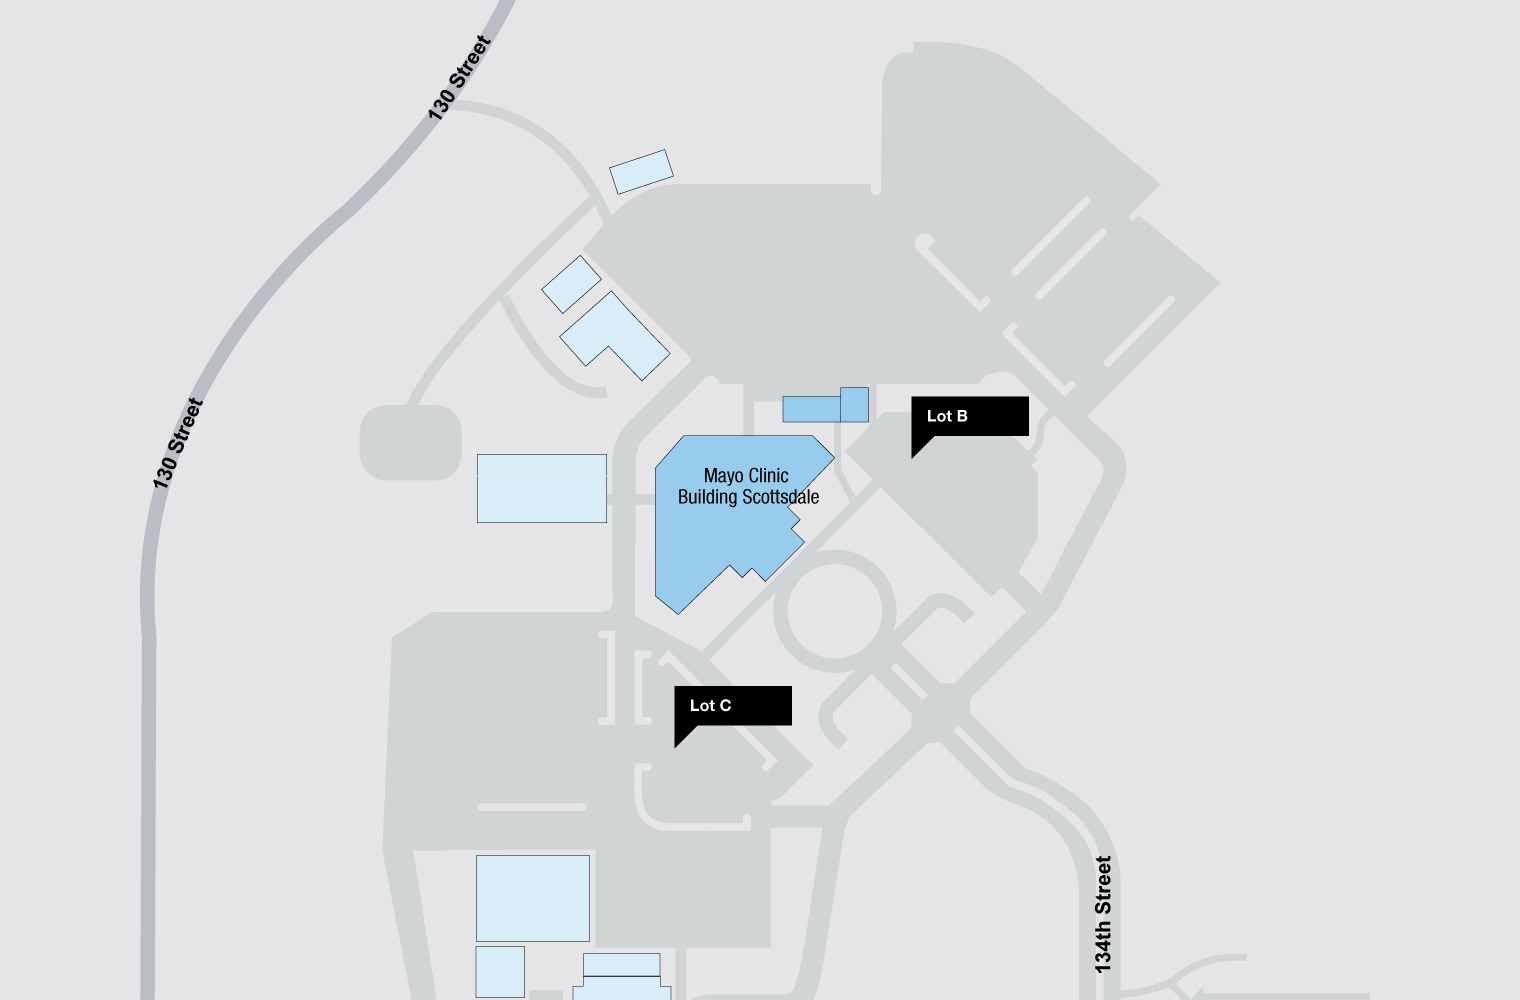 Parking map for Scottsdale campus of Mayo Clinic